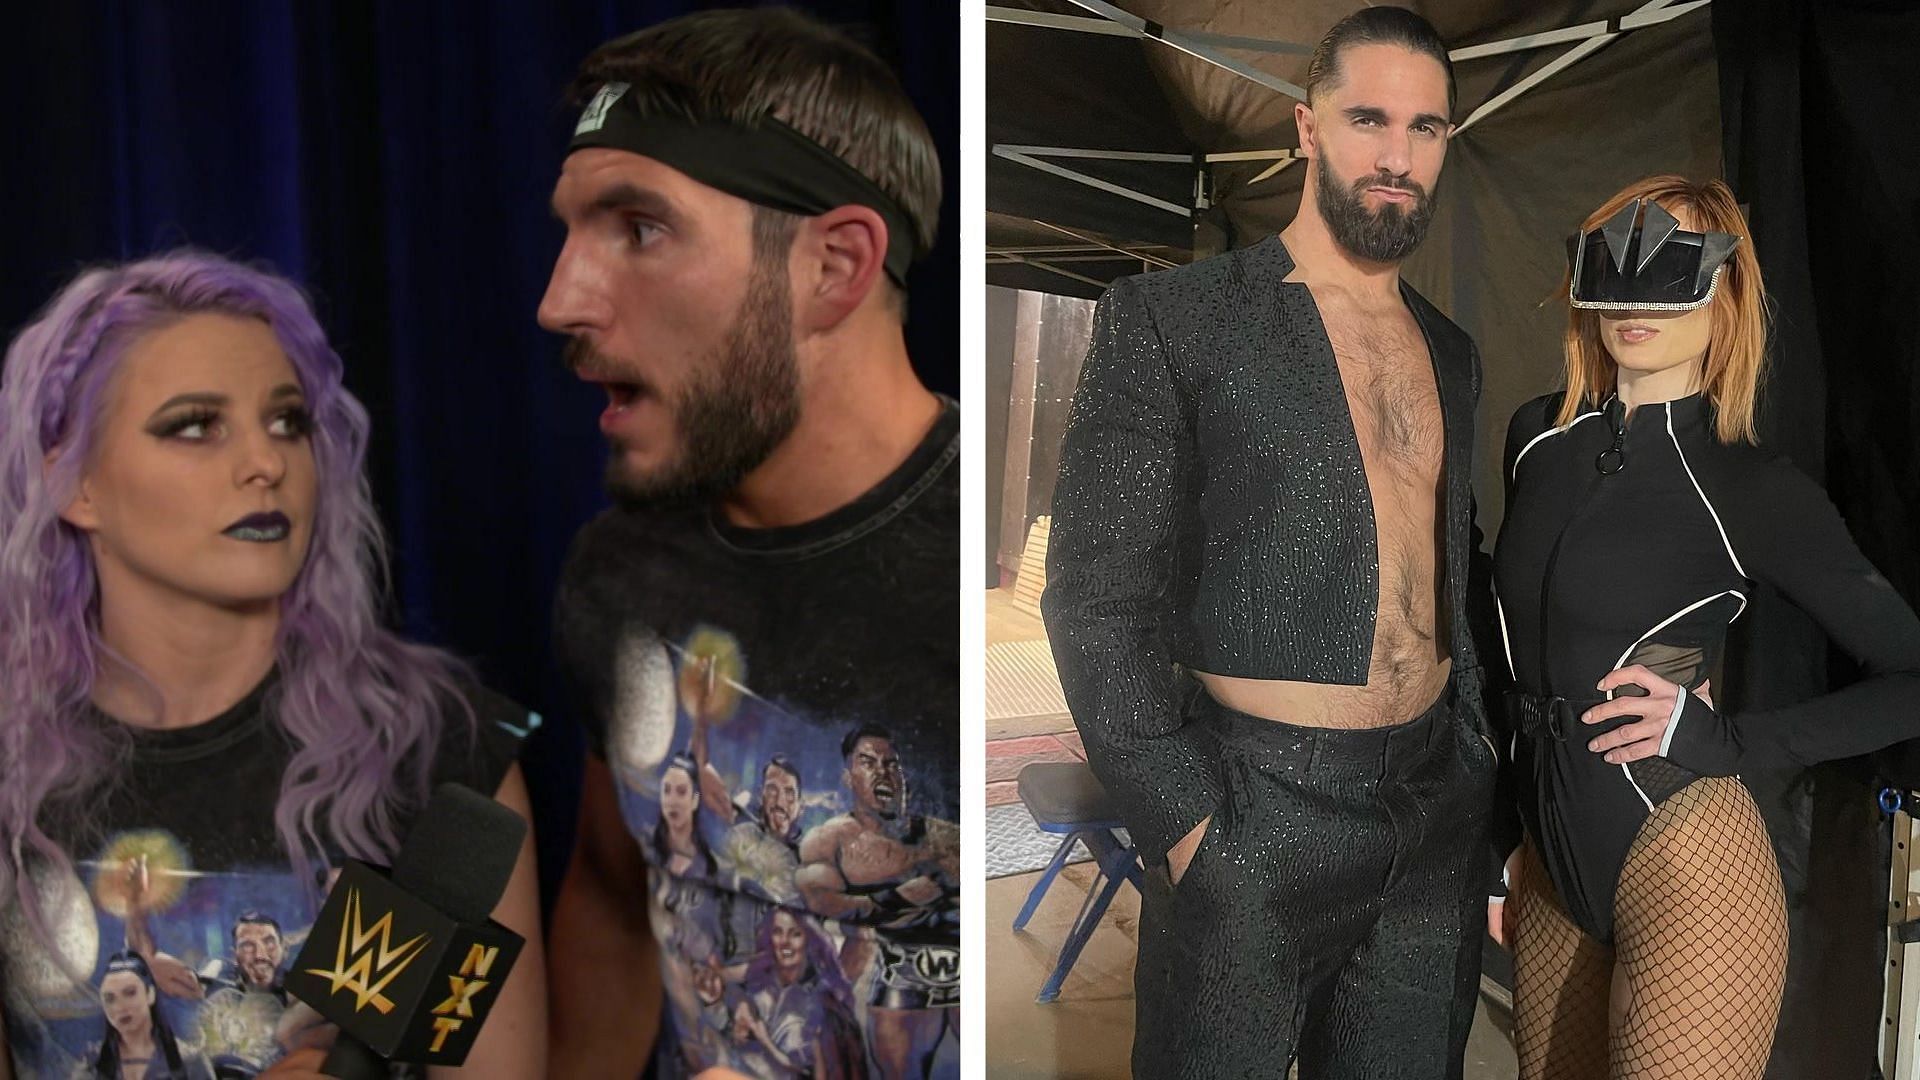 Johnny Gargano and Candice LeRae could have many interesting bouts if she returns to WWE